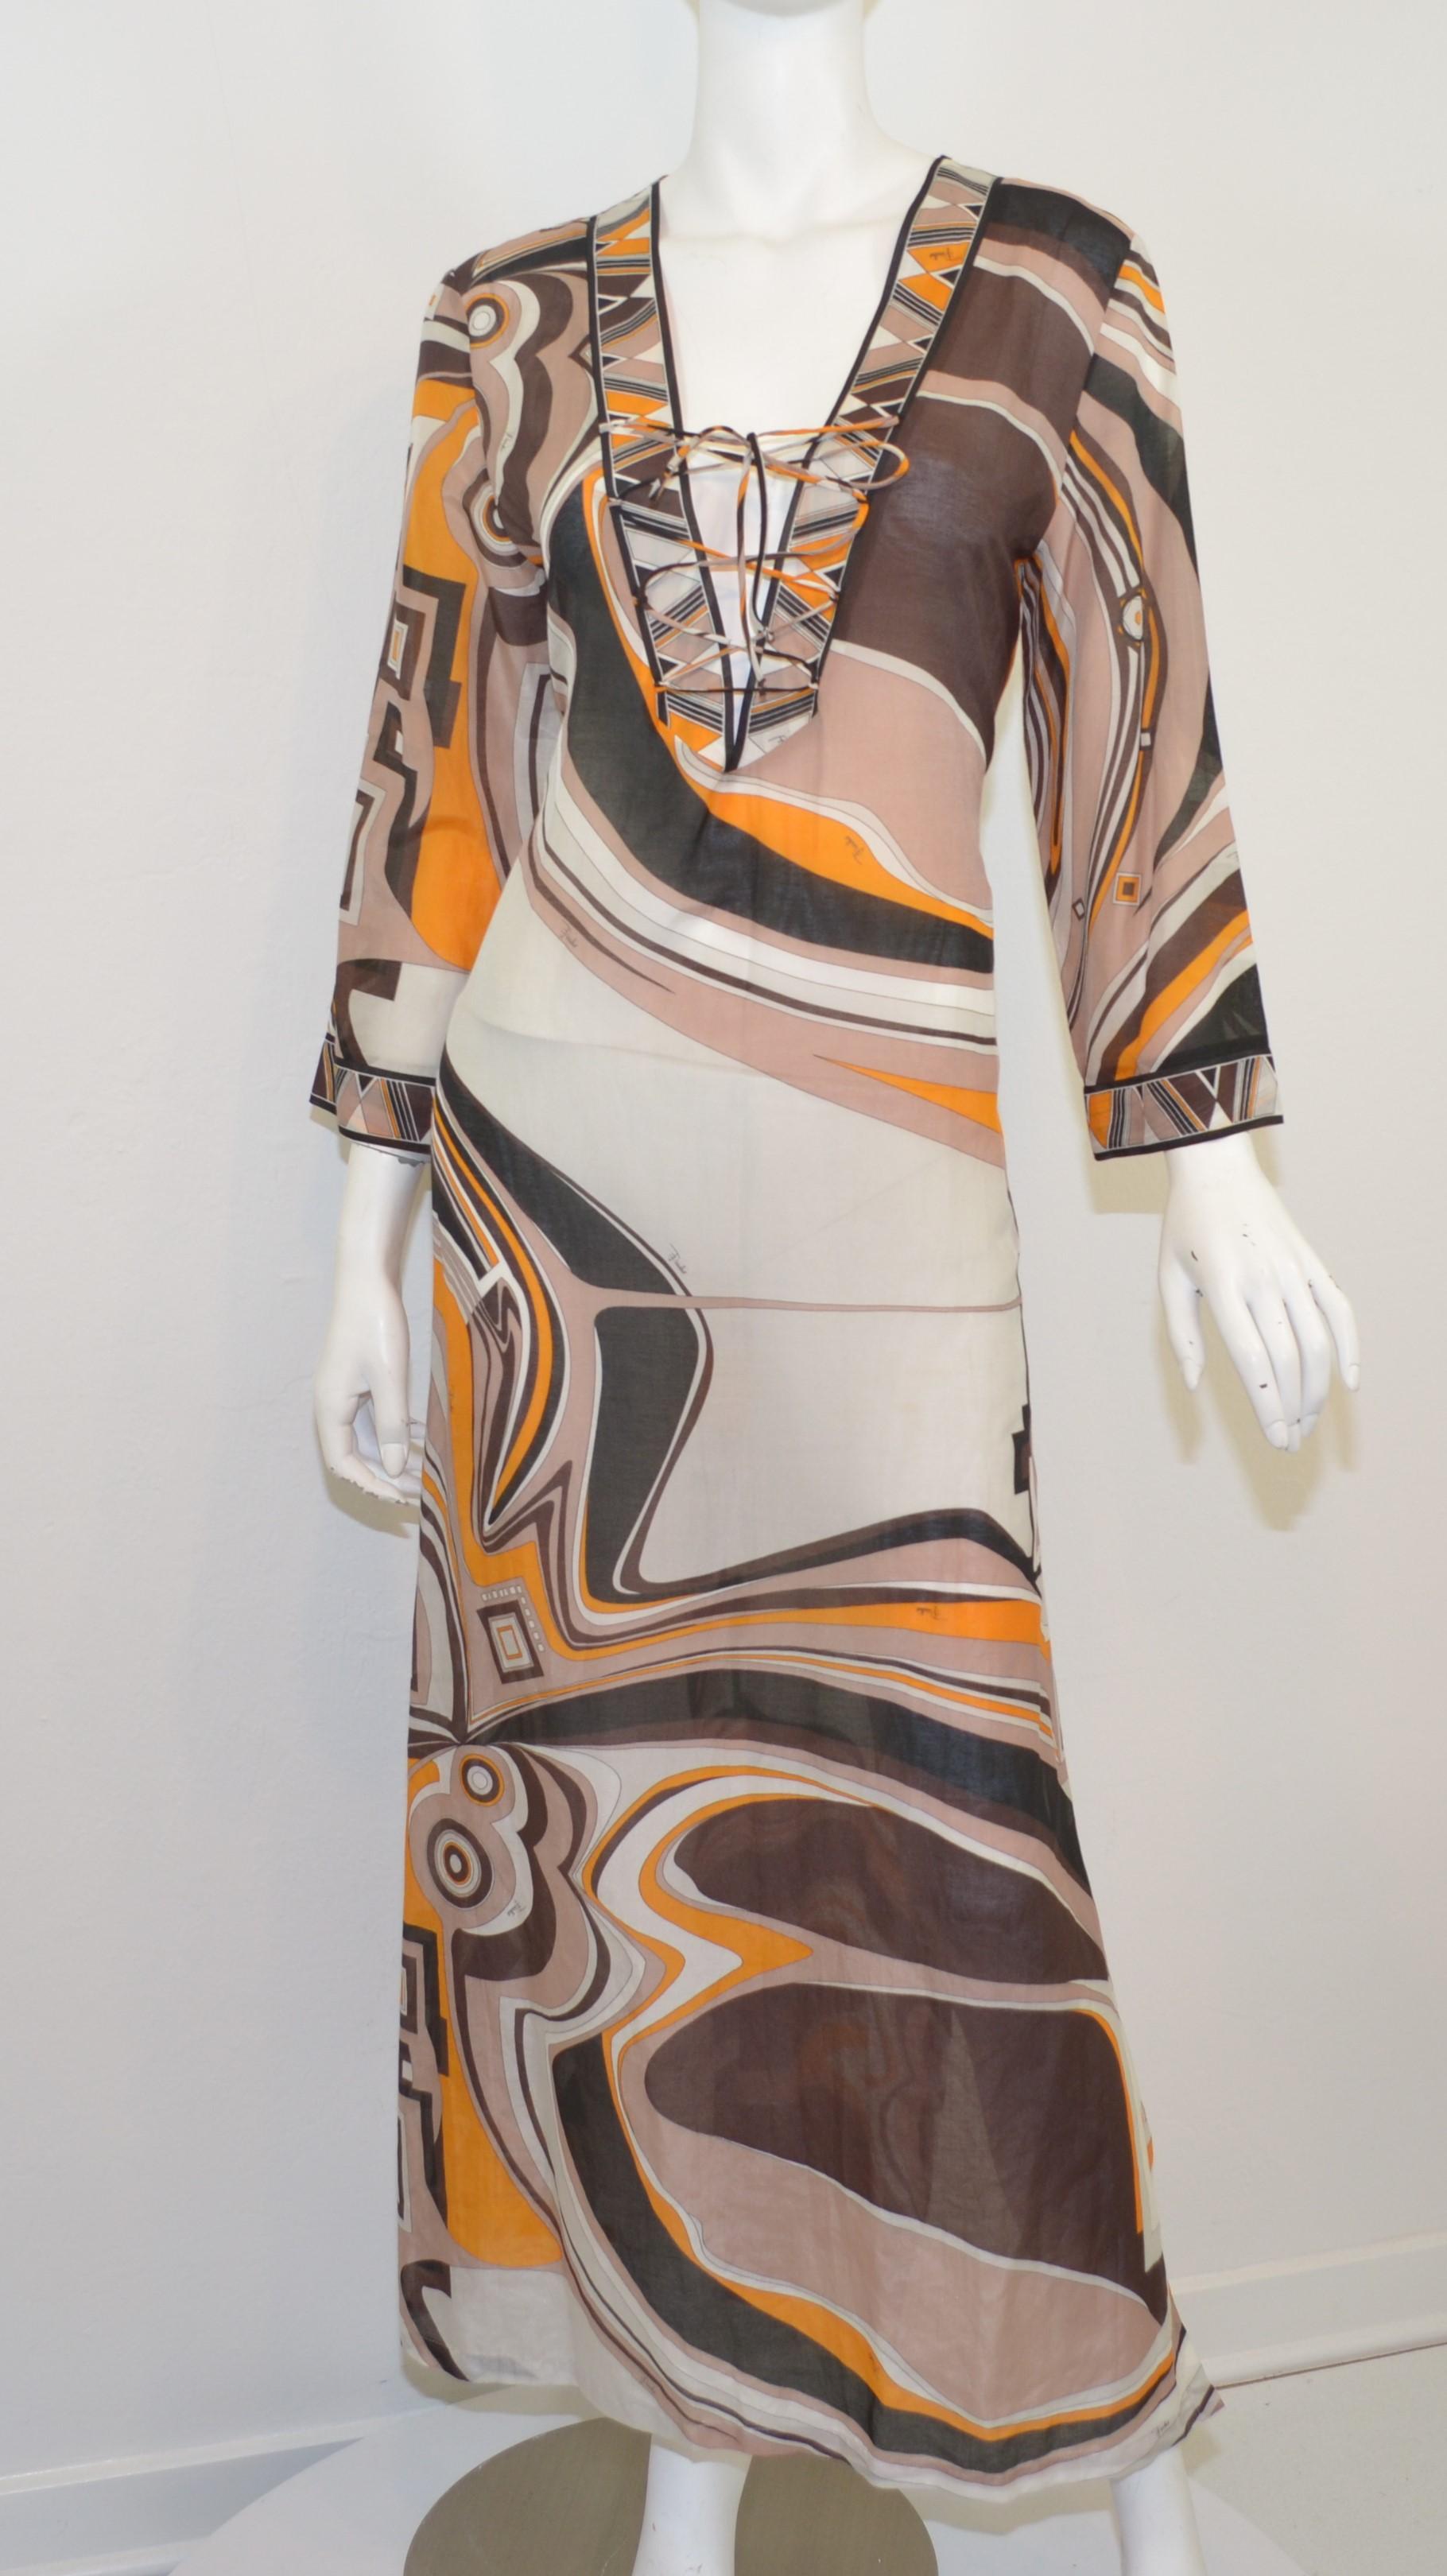 Emilio Pucci dress featured in a brown/tan print with a lace-up tie closure. Dress is a size 40 and composed with a cotton and silk blend. Excellent pre-owned condition. Made in Italy.

Measurements:
Bust 38''
Waist 38''
Hips 44''
Sleeves